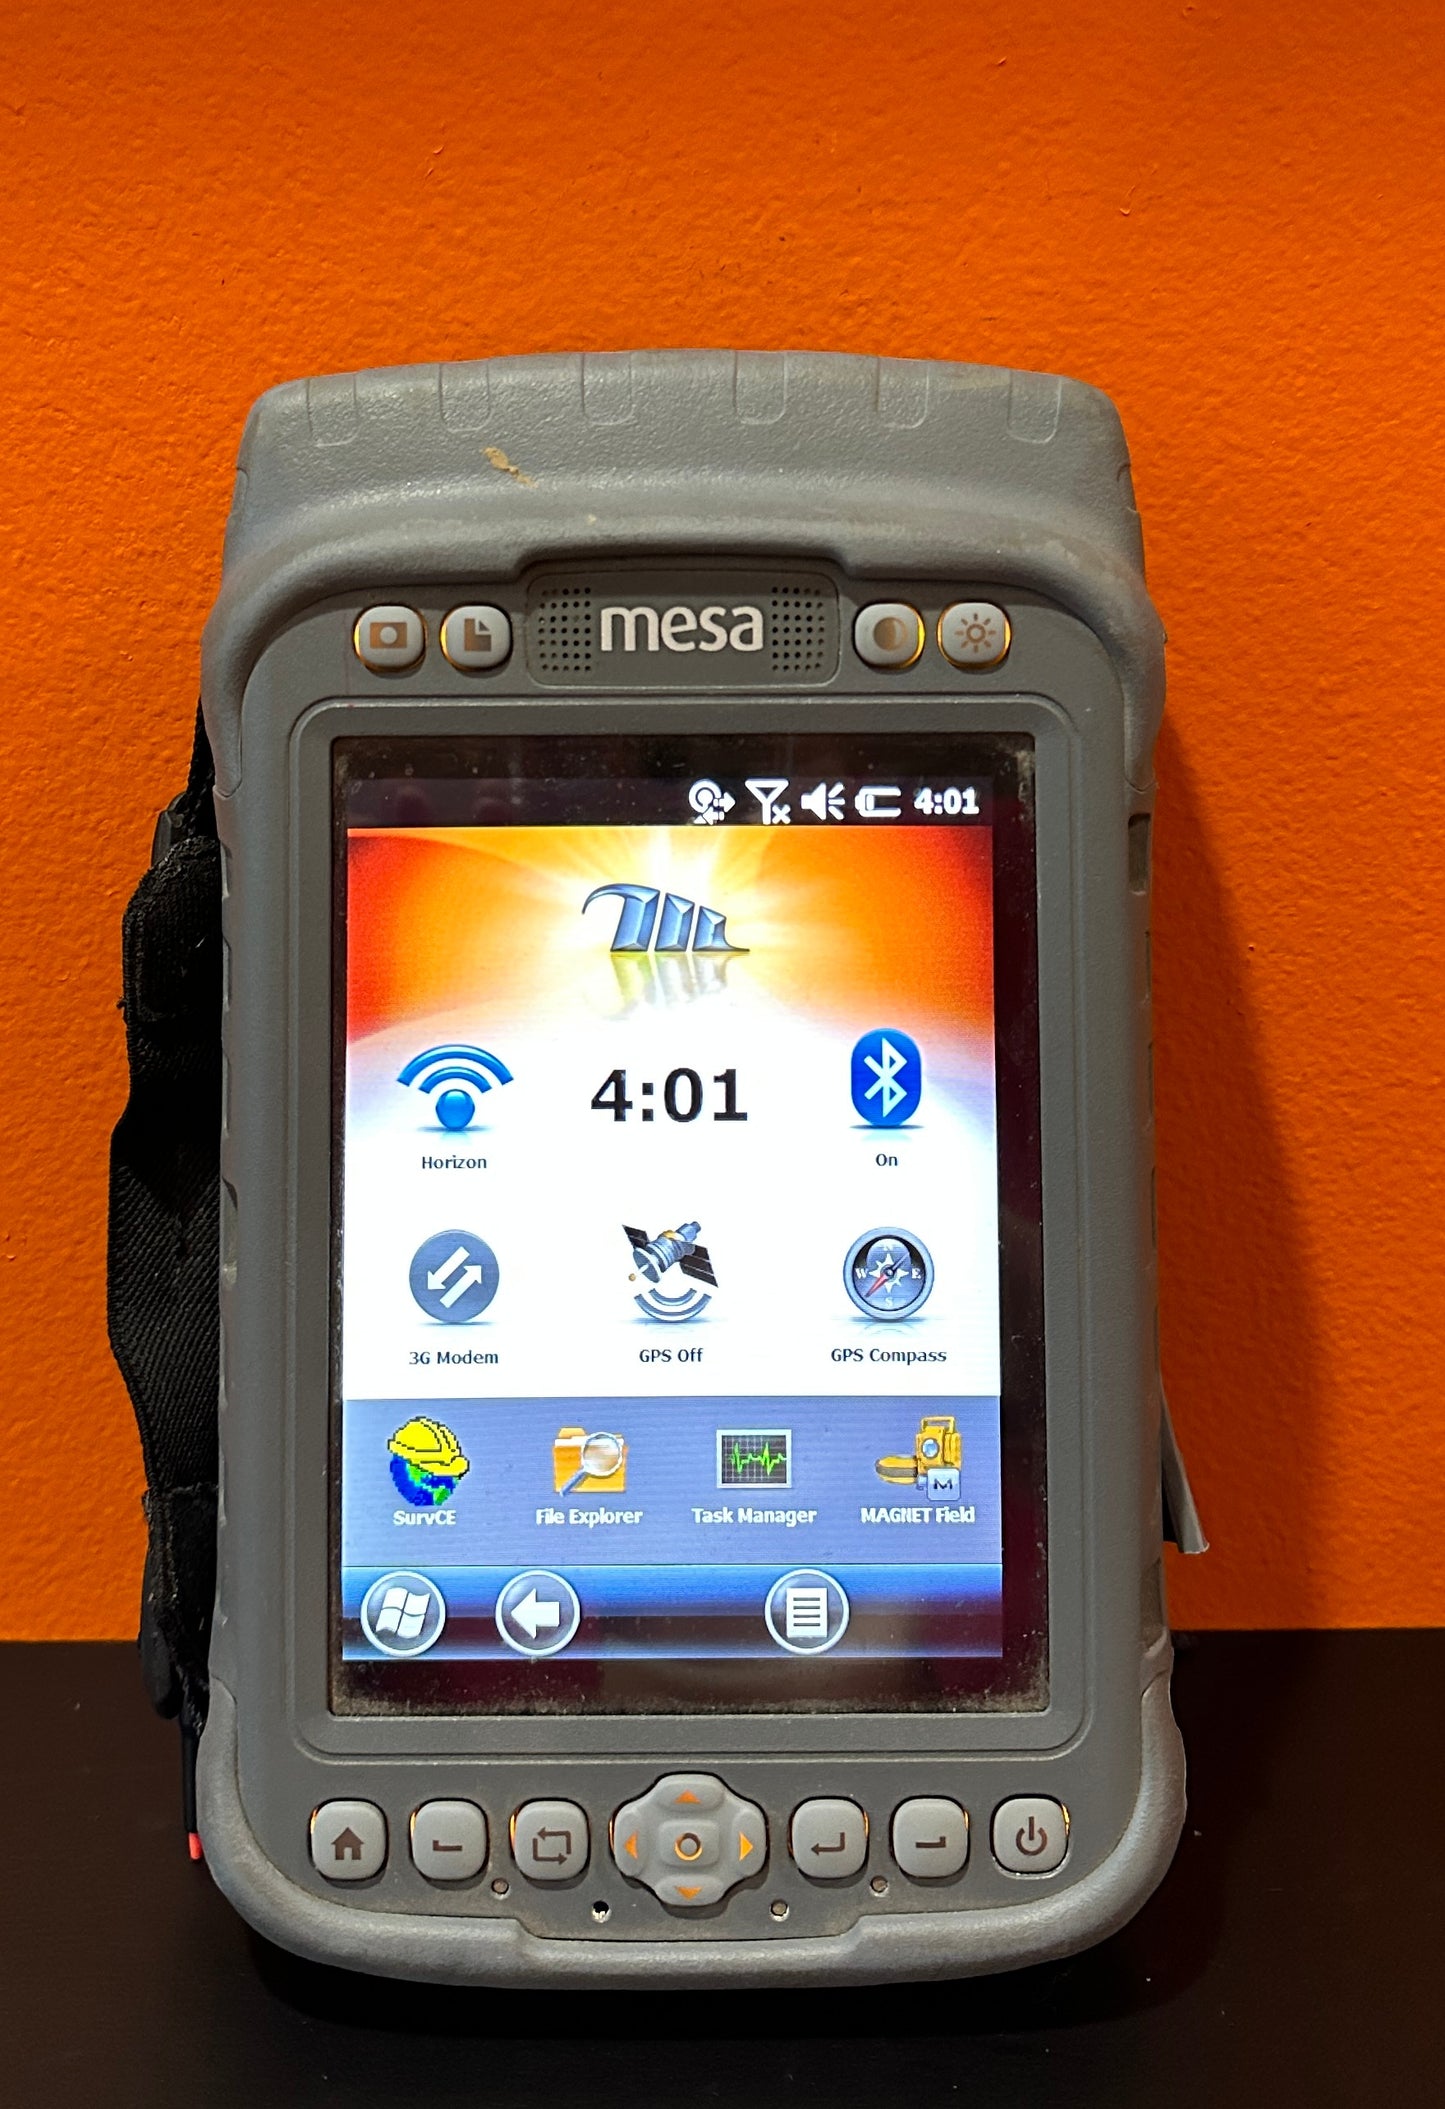 Pre-Owned Mesa Data Collector